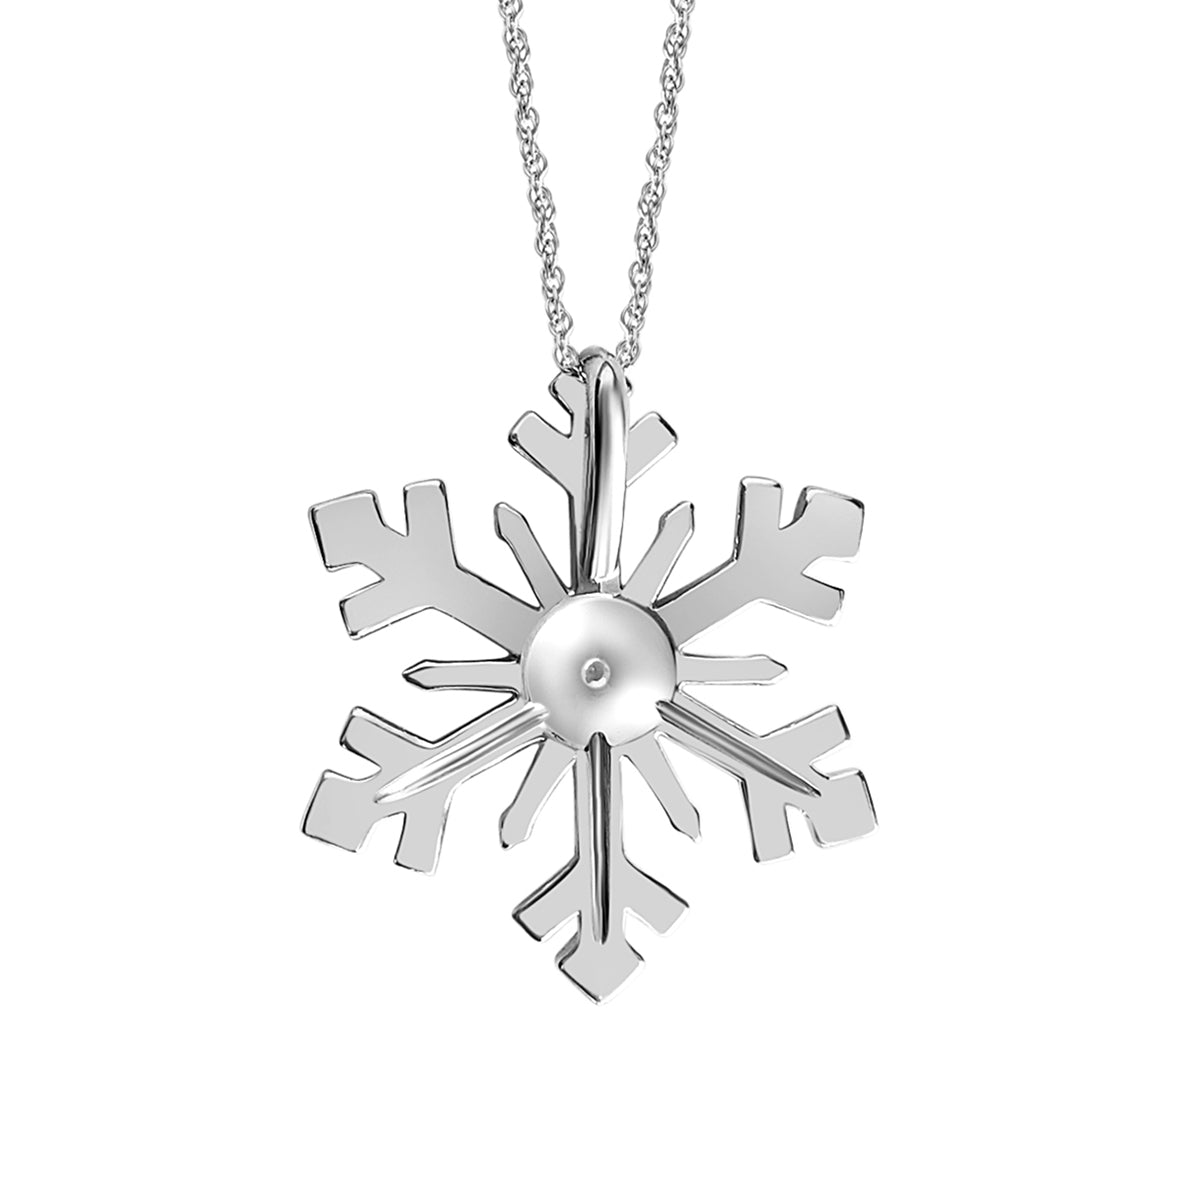 Set of 3 Sterling Silver Diamond Accent Snowflake Pendant 18-inch Necklace